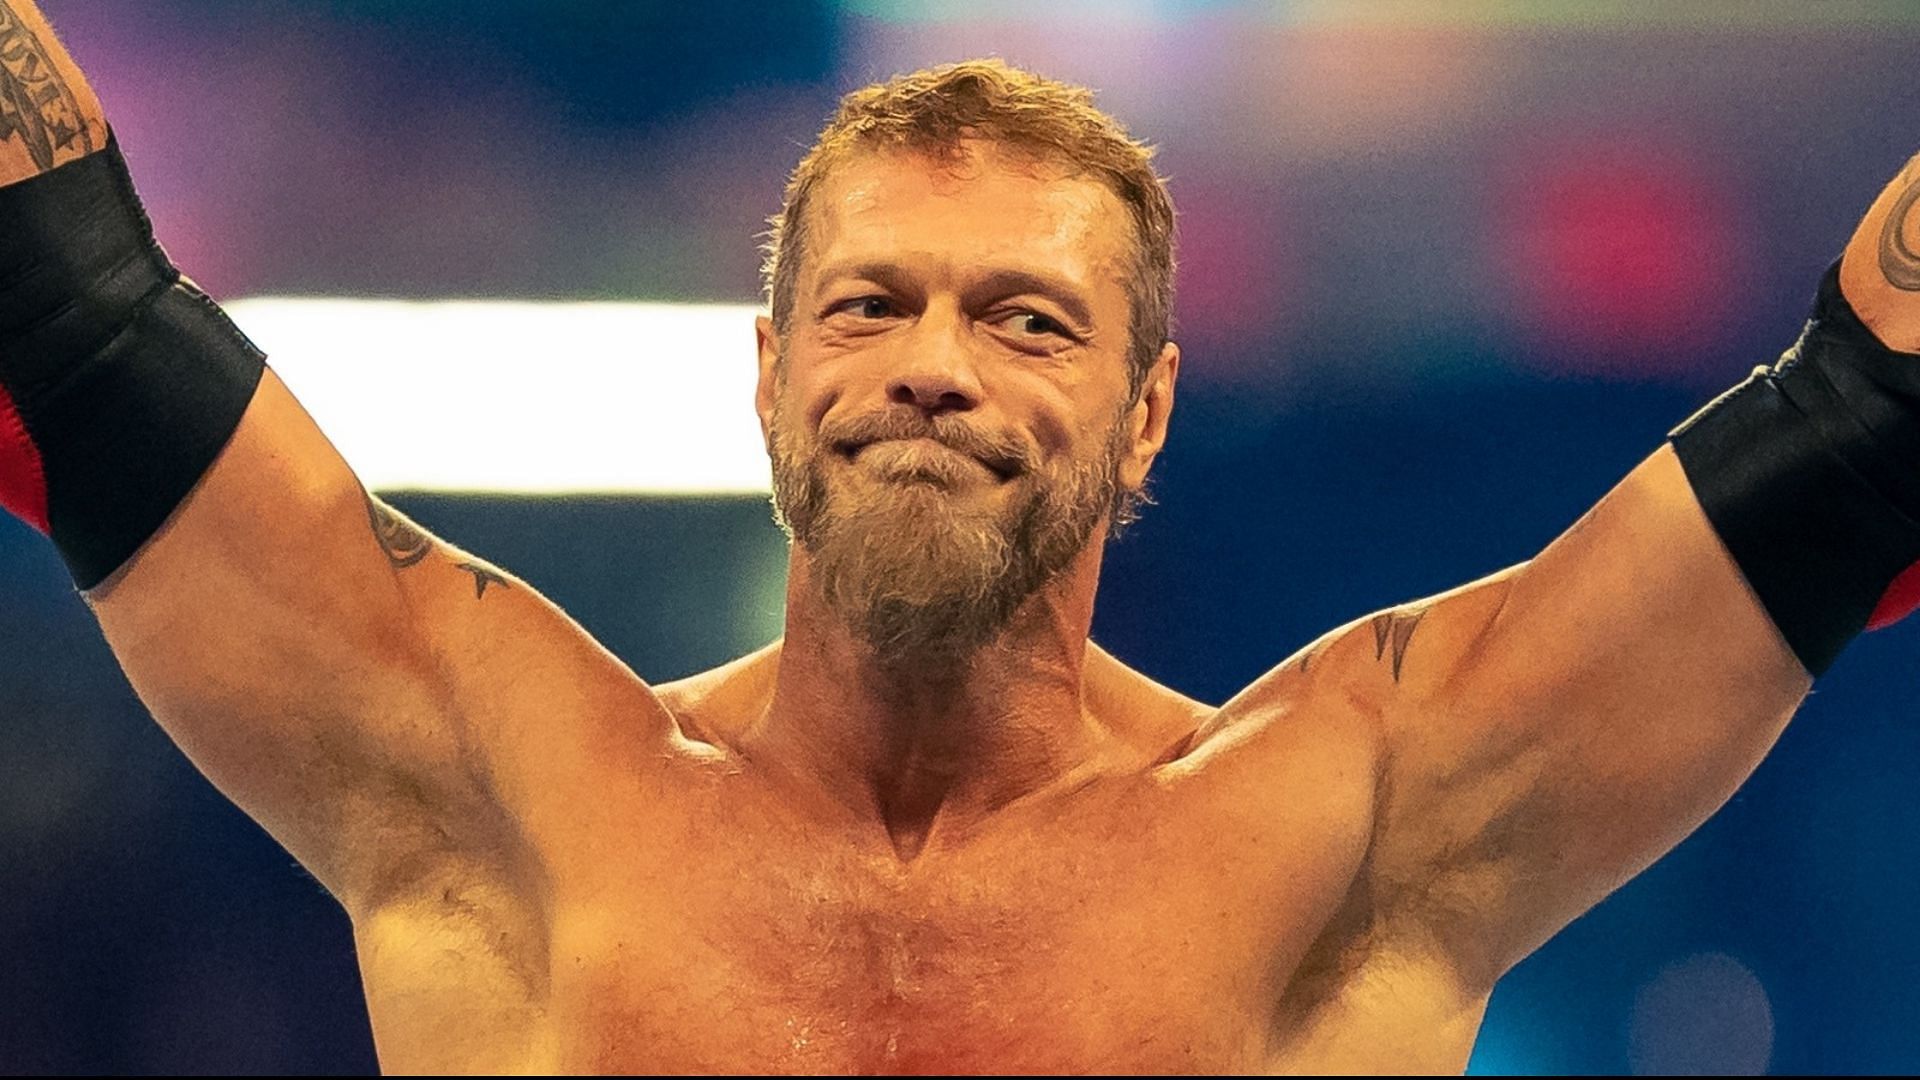 Edge is a current WWE Superstar